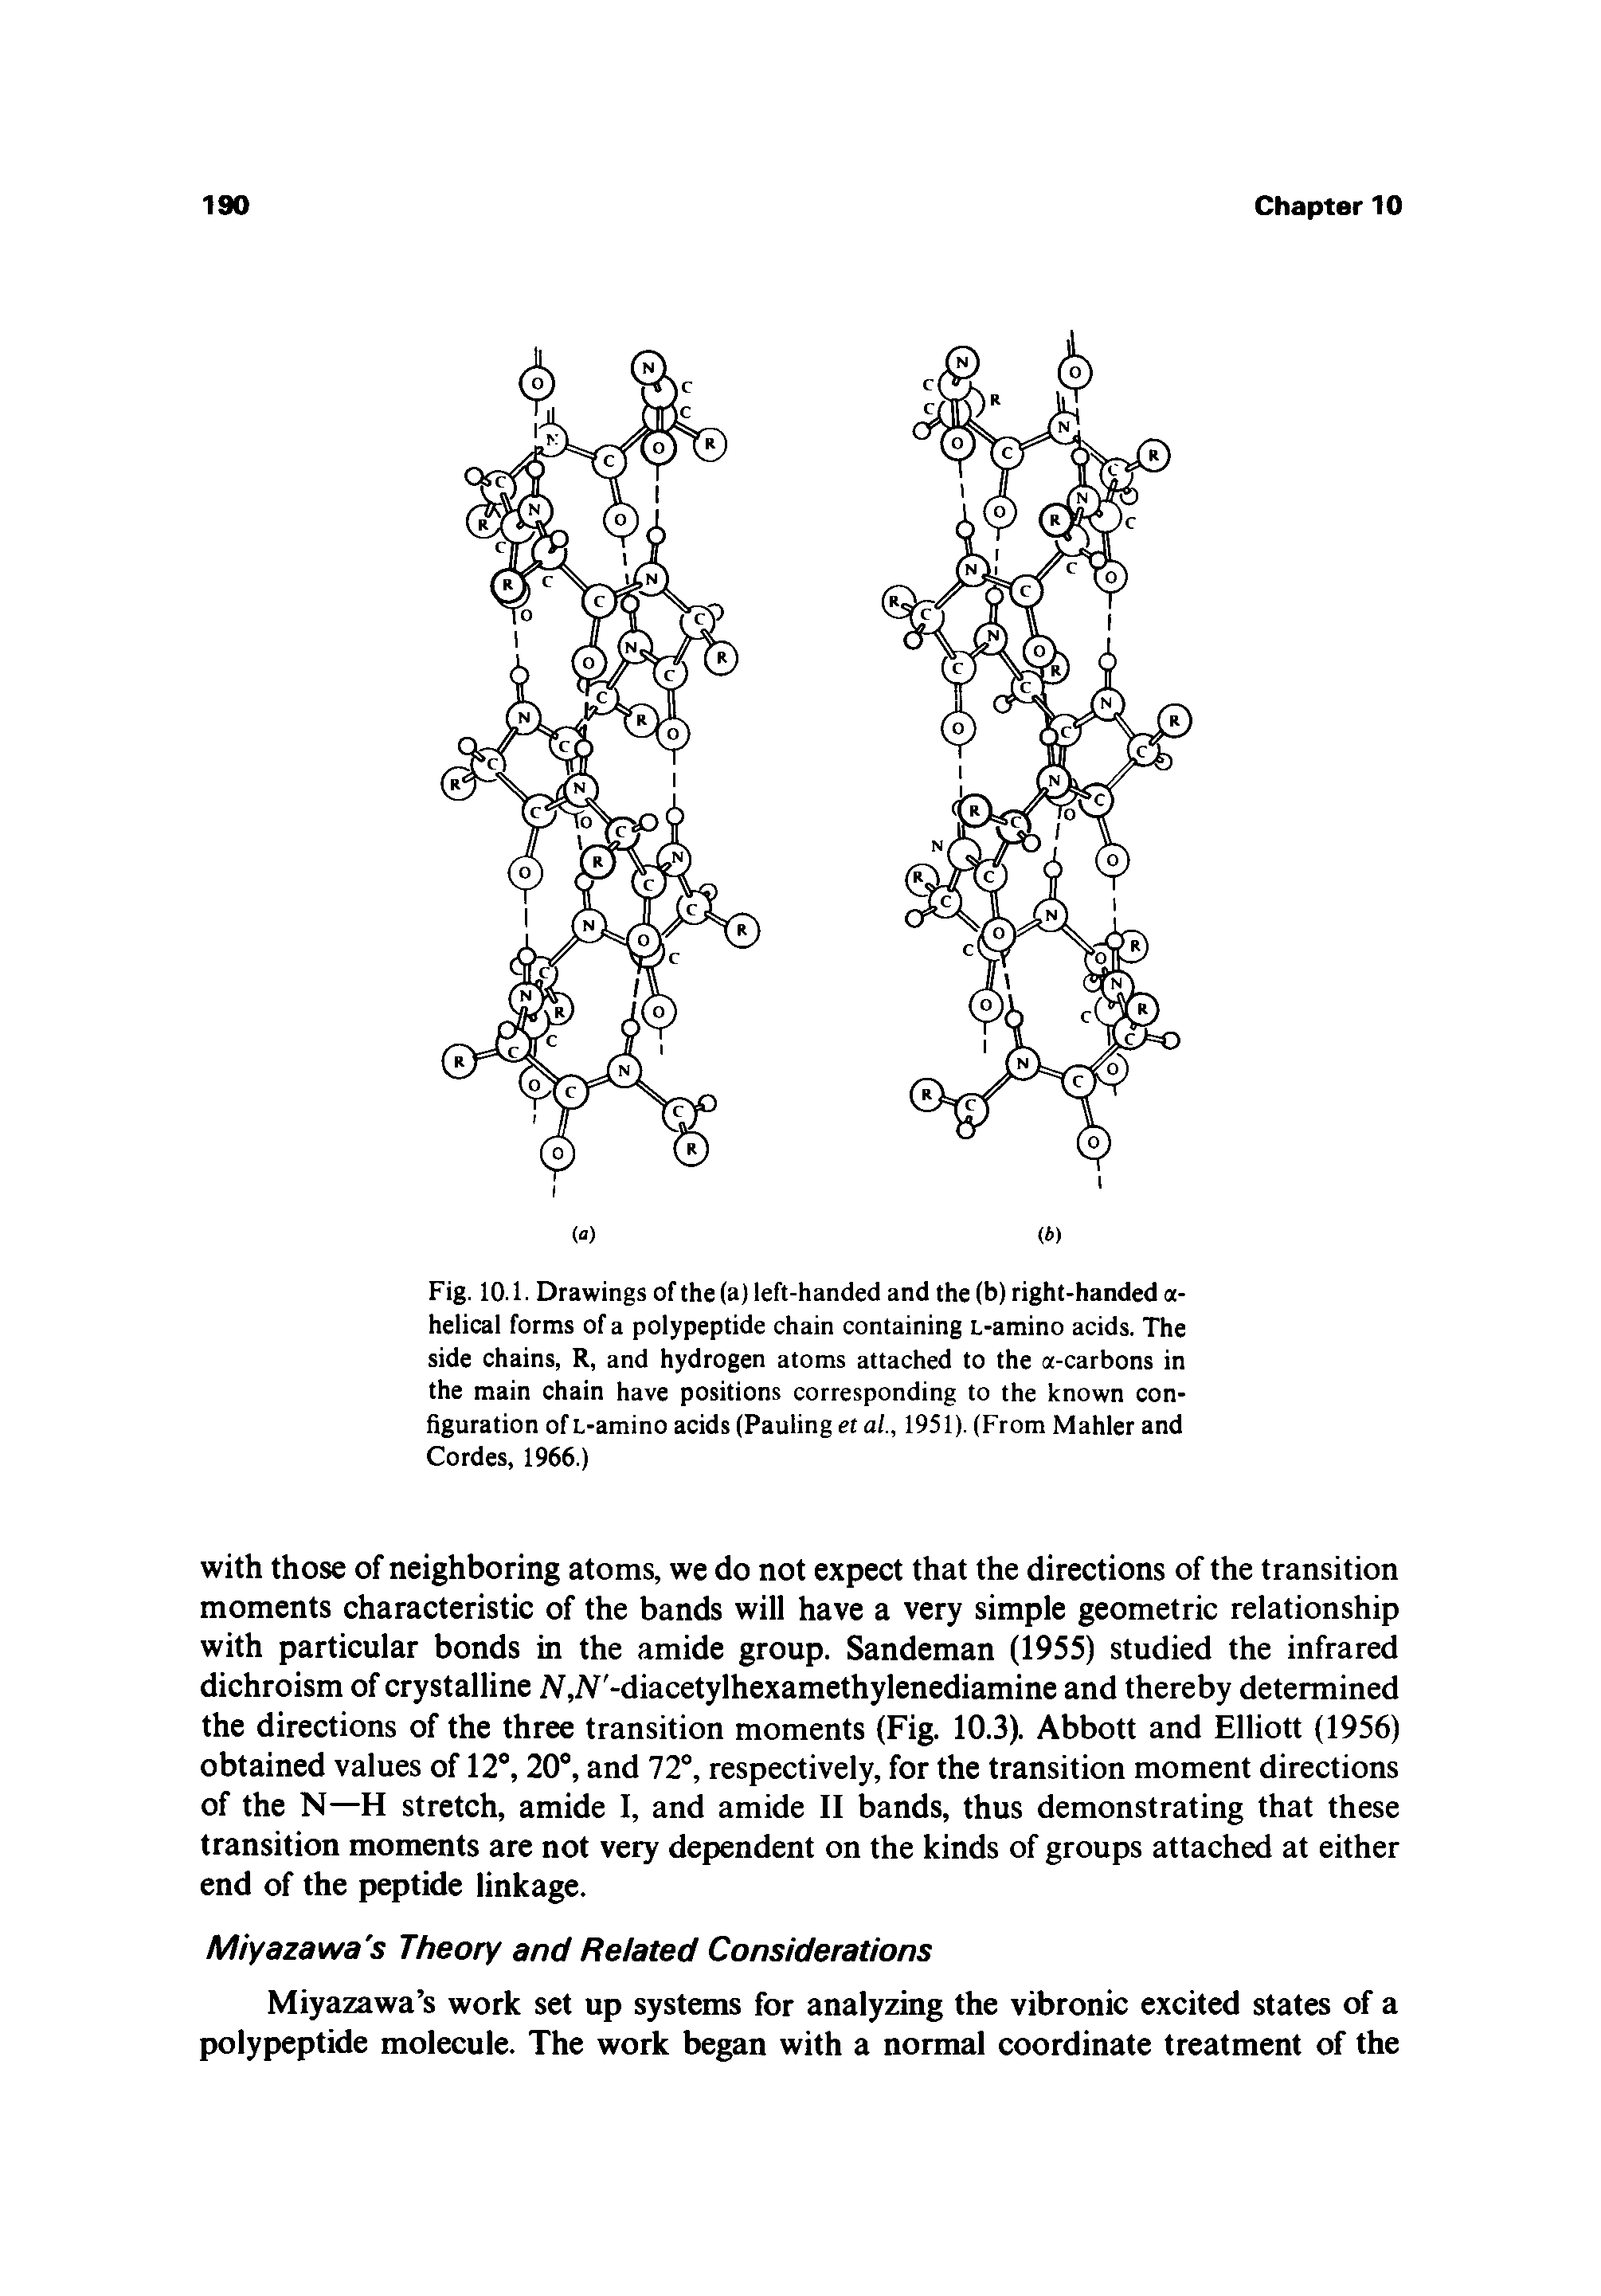 Fig. 10.1. Drawings of the (a) left-handed and the (b) right-handed a-helical forms of a polypeptide chain containing L>amino acids. The side chains, R, and hydrogen atoms attached to the a-carbons in the main chain have positions corresponding to the known configuration of L-amino acids (Pauling et al., 1951). (From Mahler and Cordes, 1966.)...